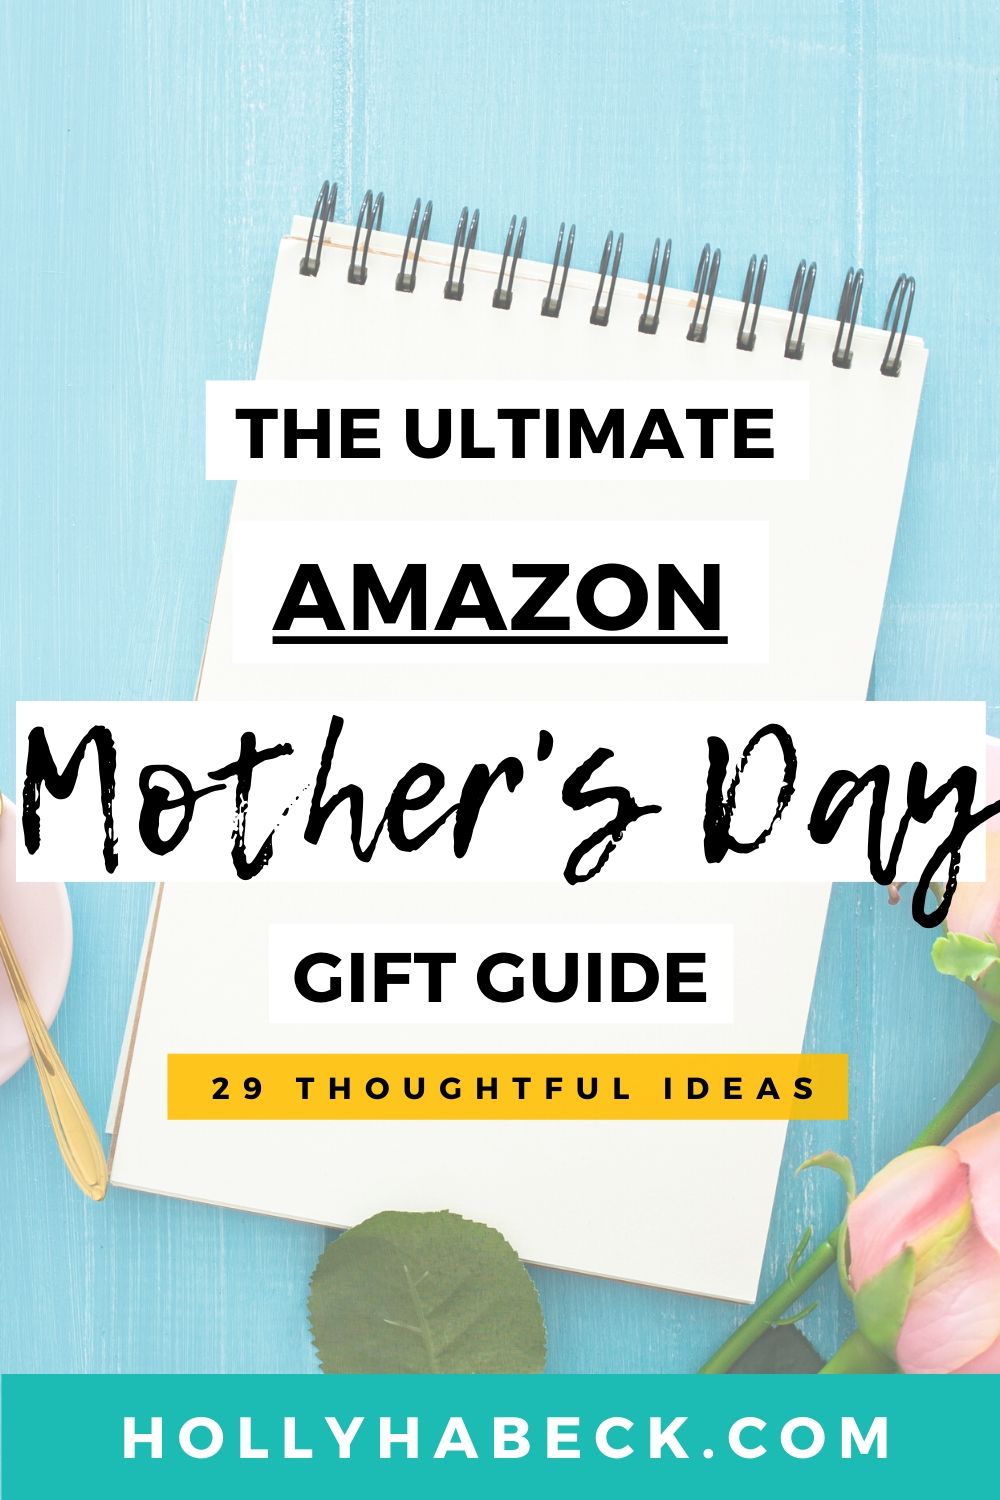 The Ultimate Amazon Mother's Day Gift Guide: 29 Thoughtful Ideas